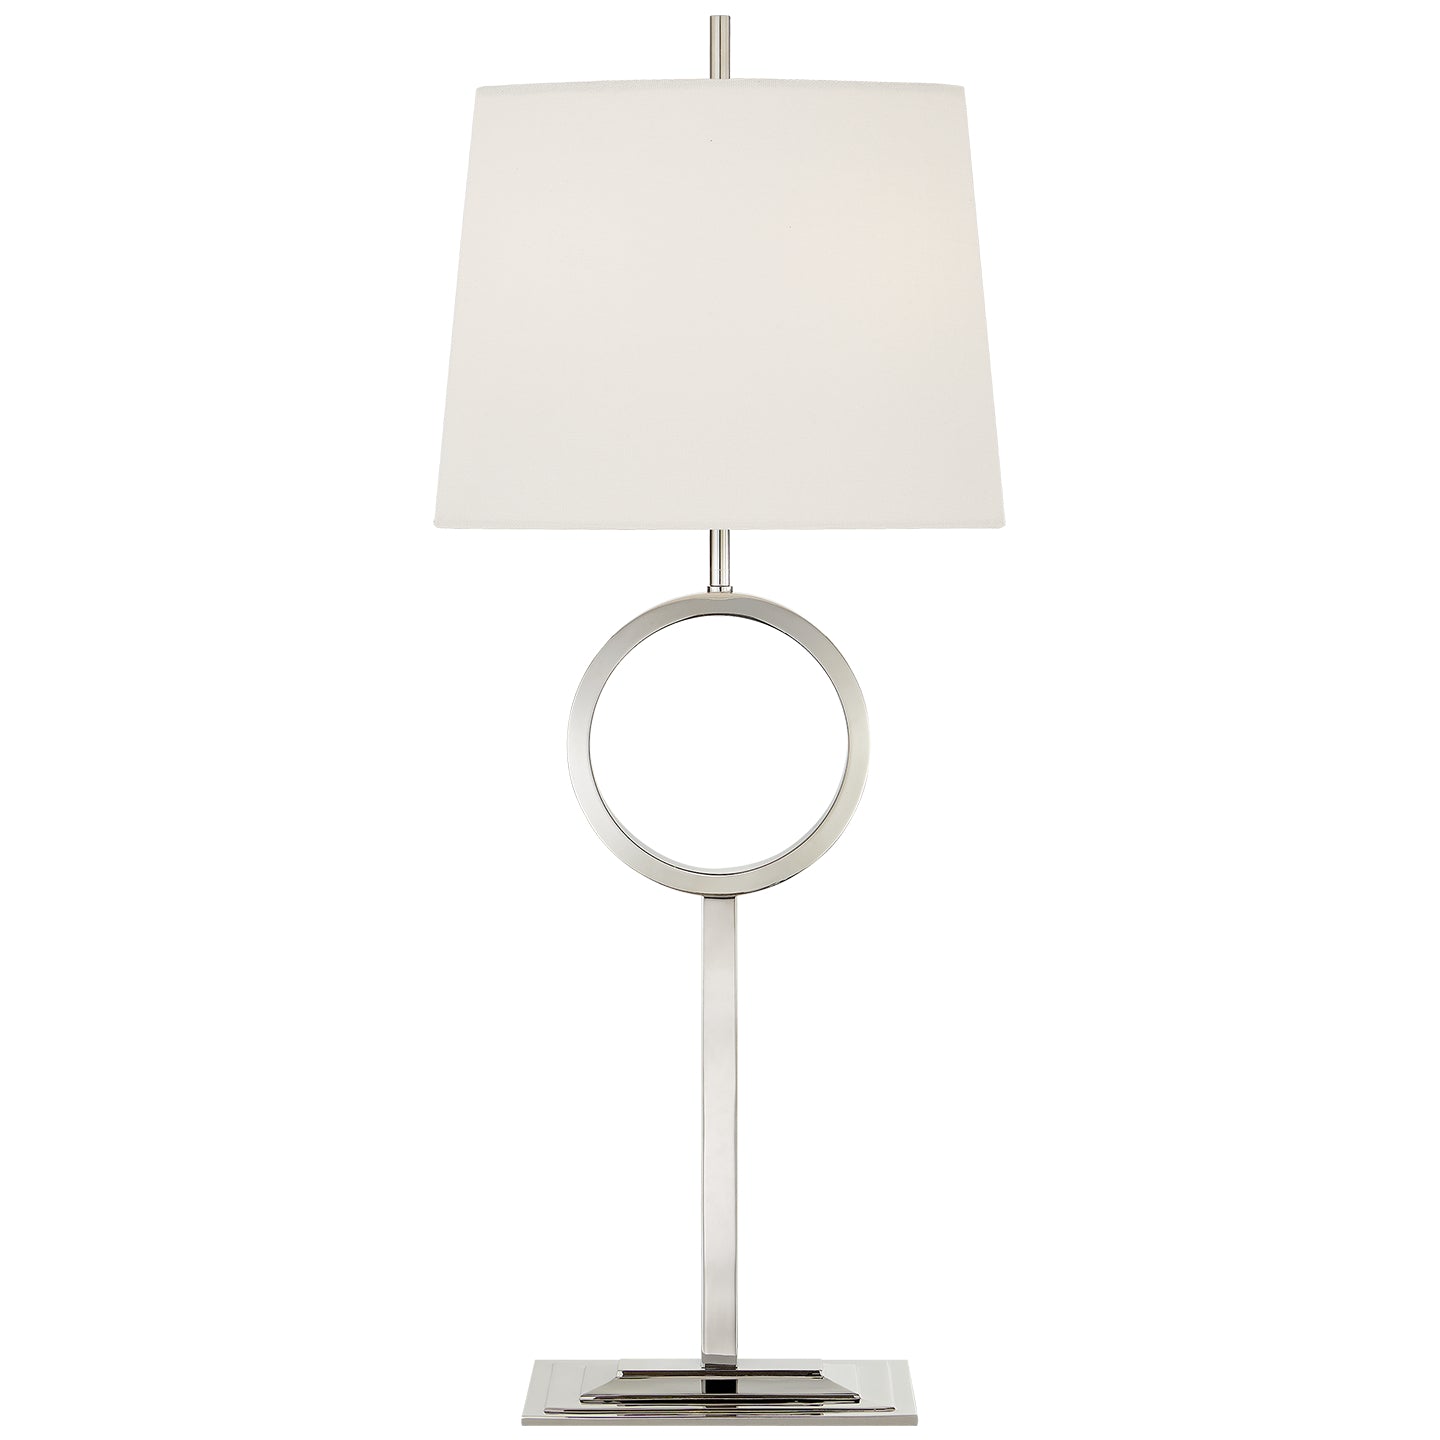 Load image into Gallery viewer, Visual Comfort Signature - TOB 3631PN-L - One Light Buffet Lamp - Simone - Polished Nickel
